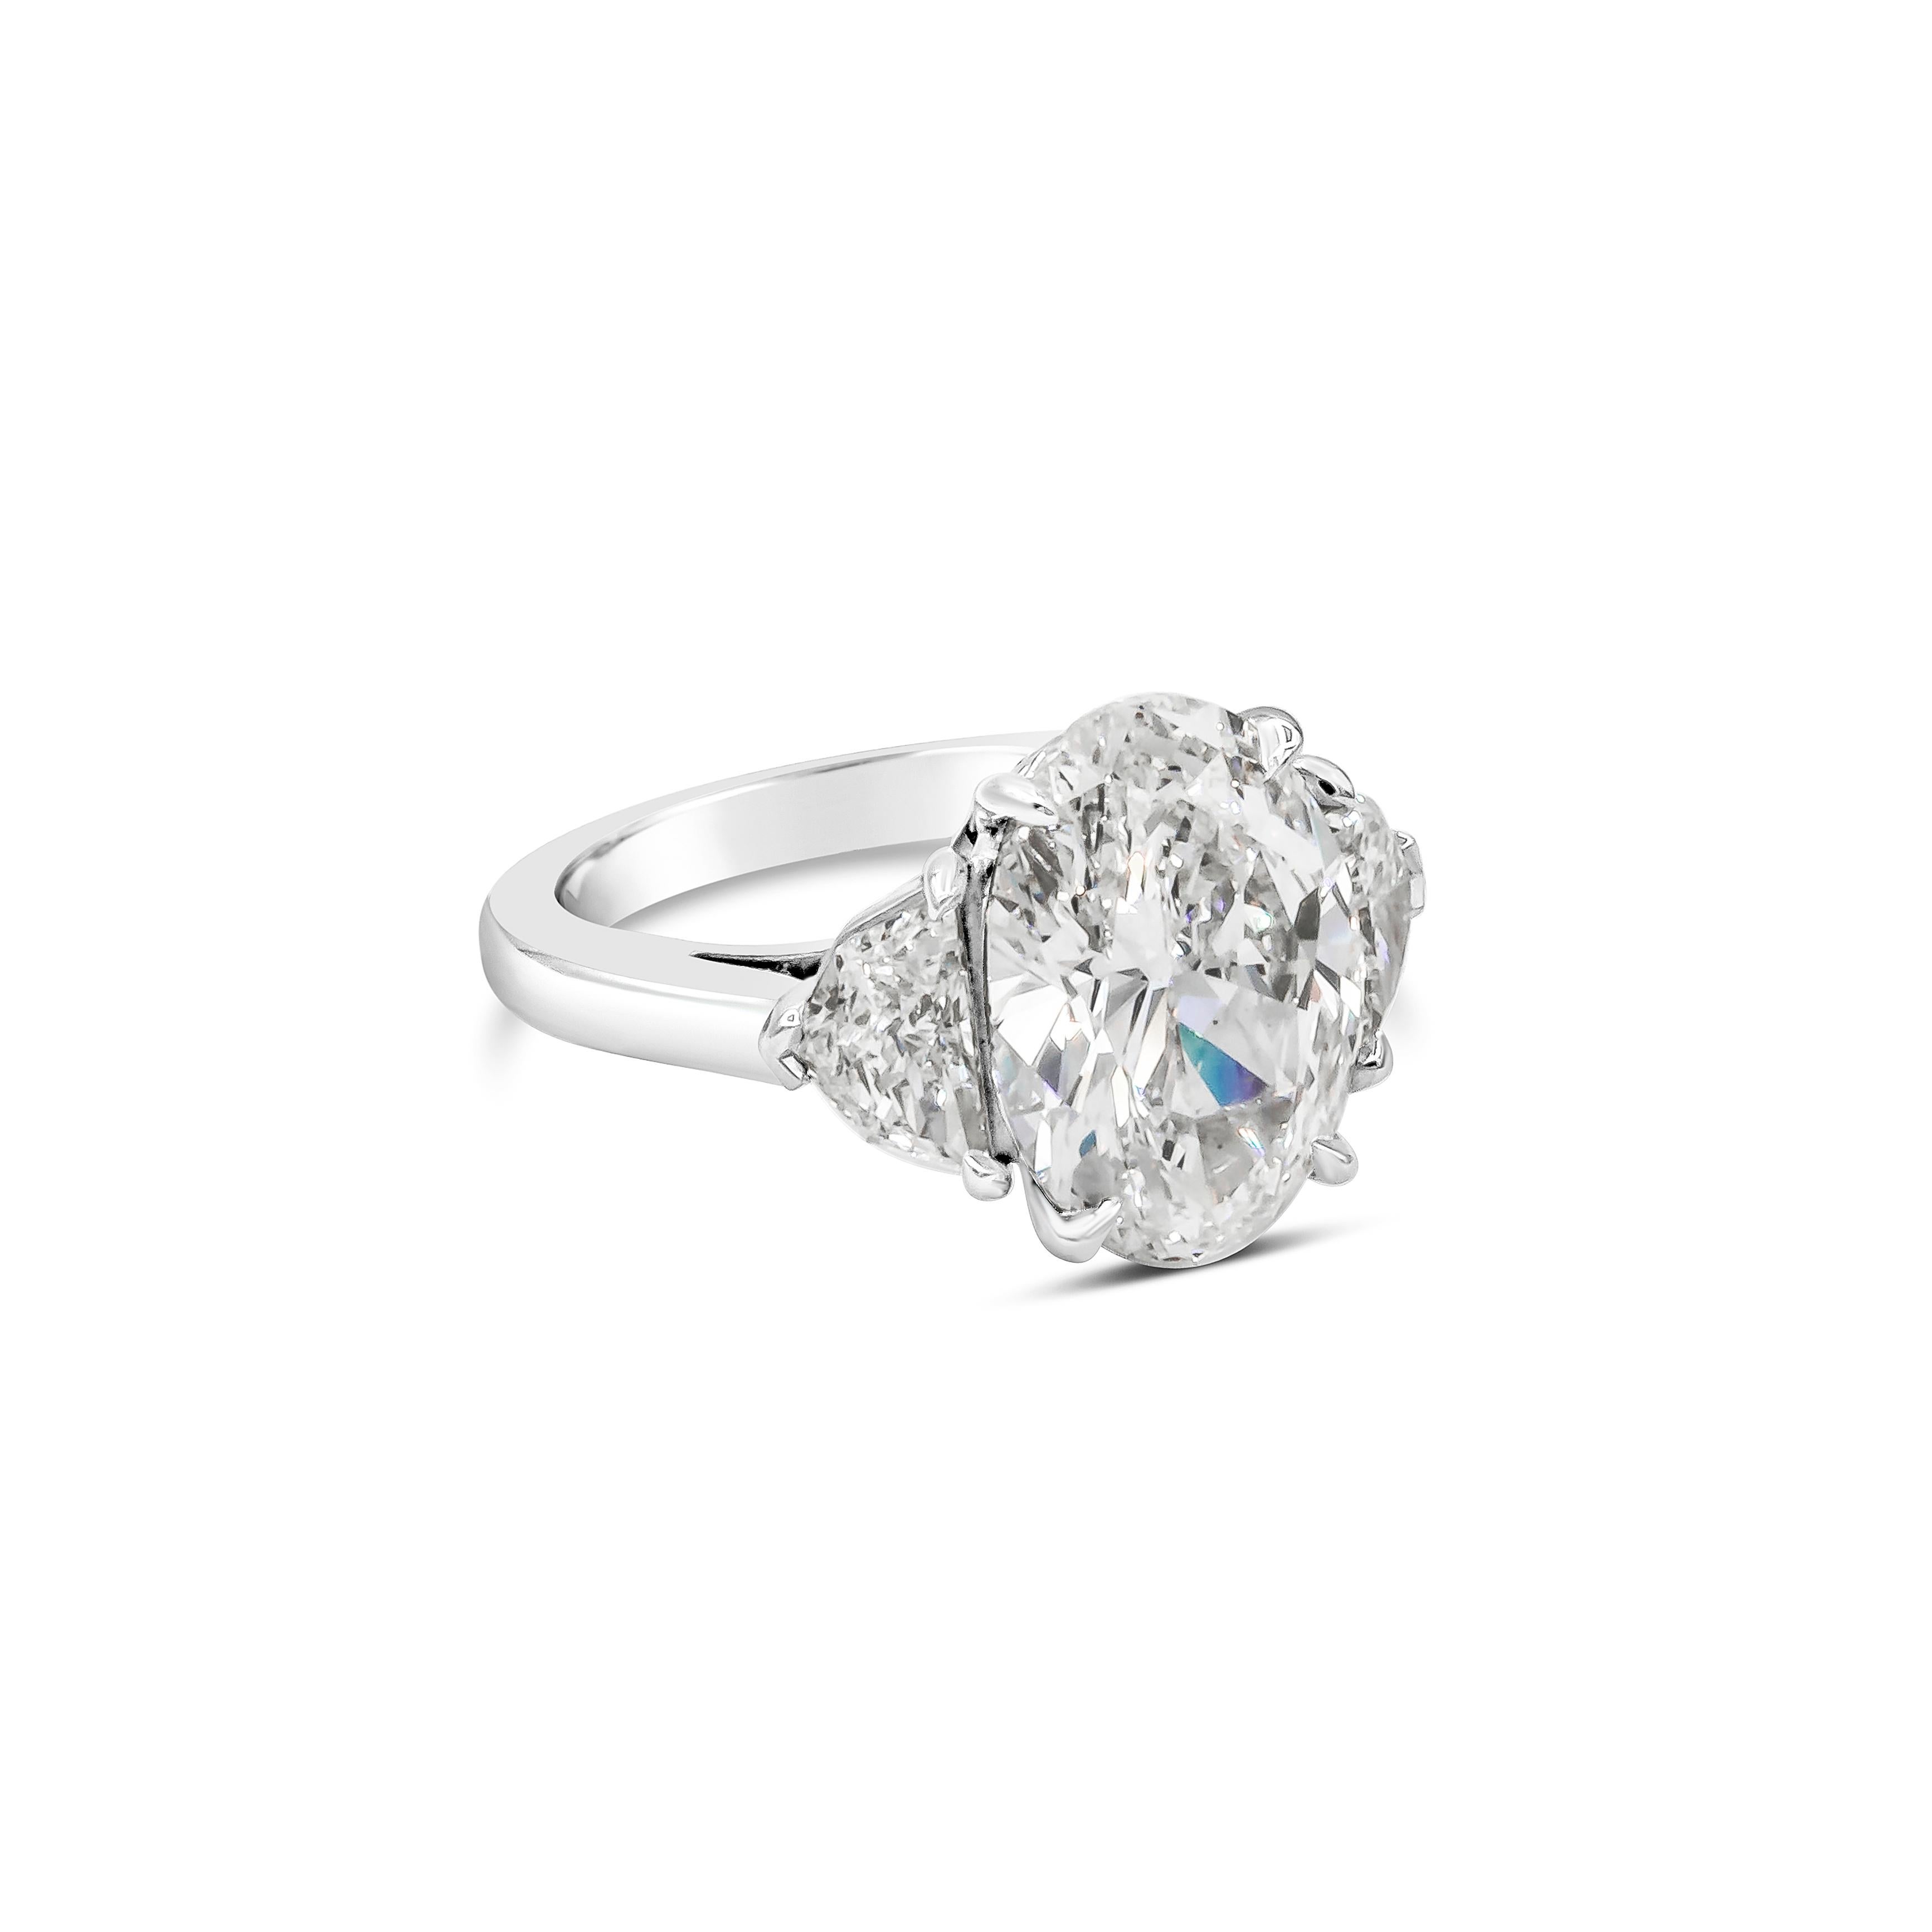 A chic engagement ring style showcasing a 5.04 carat oval cut diamond certified by GIA as I color, SI1 clarity. Flanking the center stone are two brilliant epaulette diamonds weighing 0.92 carats total, set in a polished platinum mounting.

Style